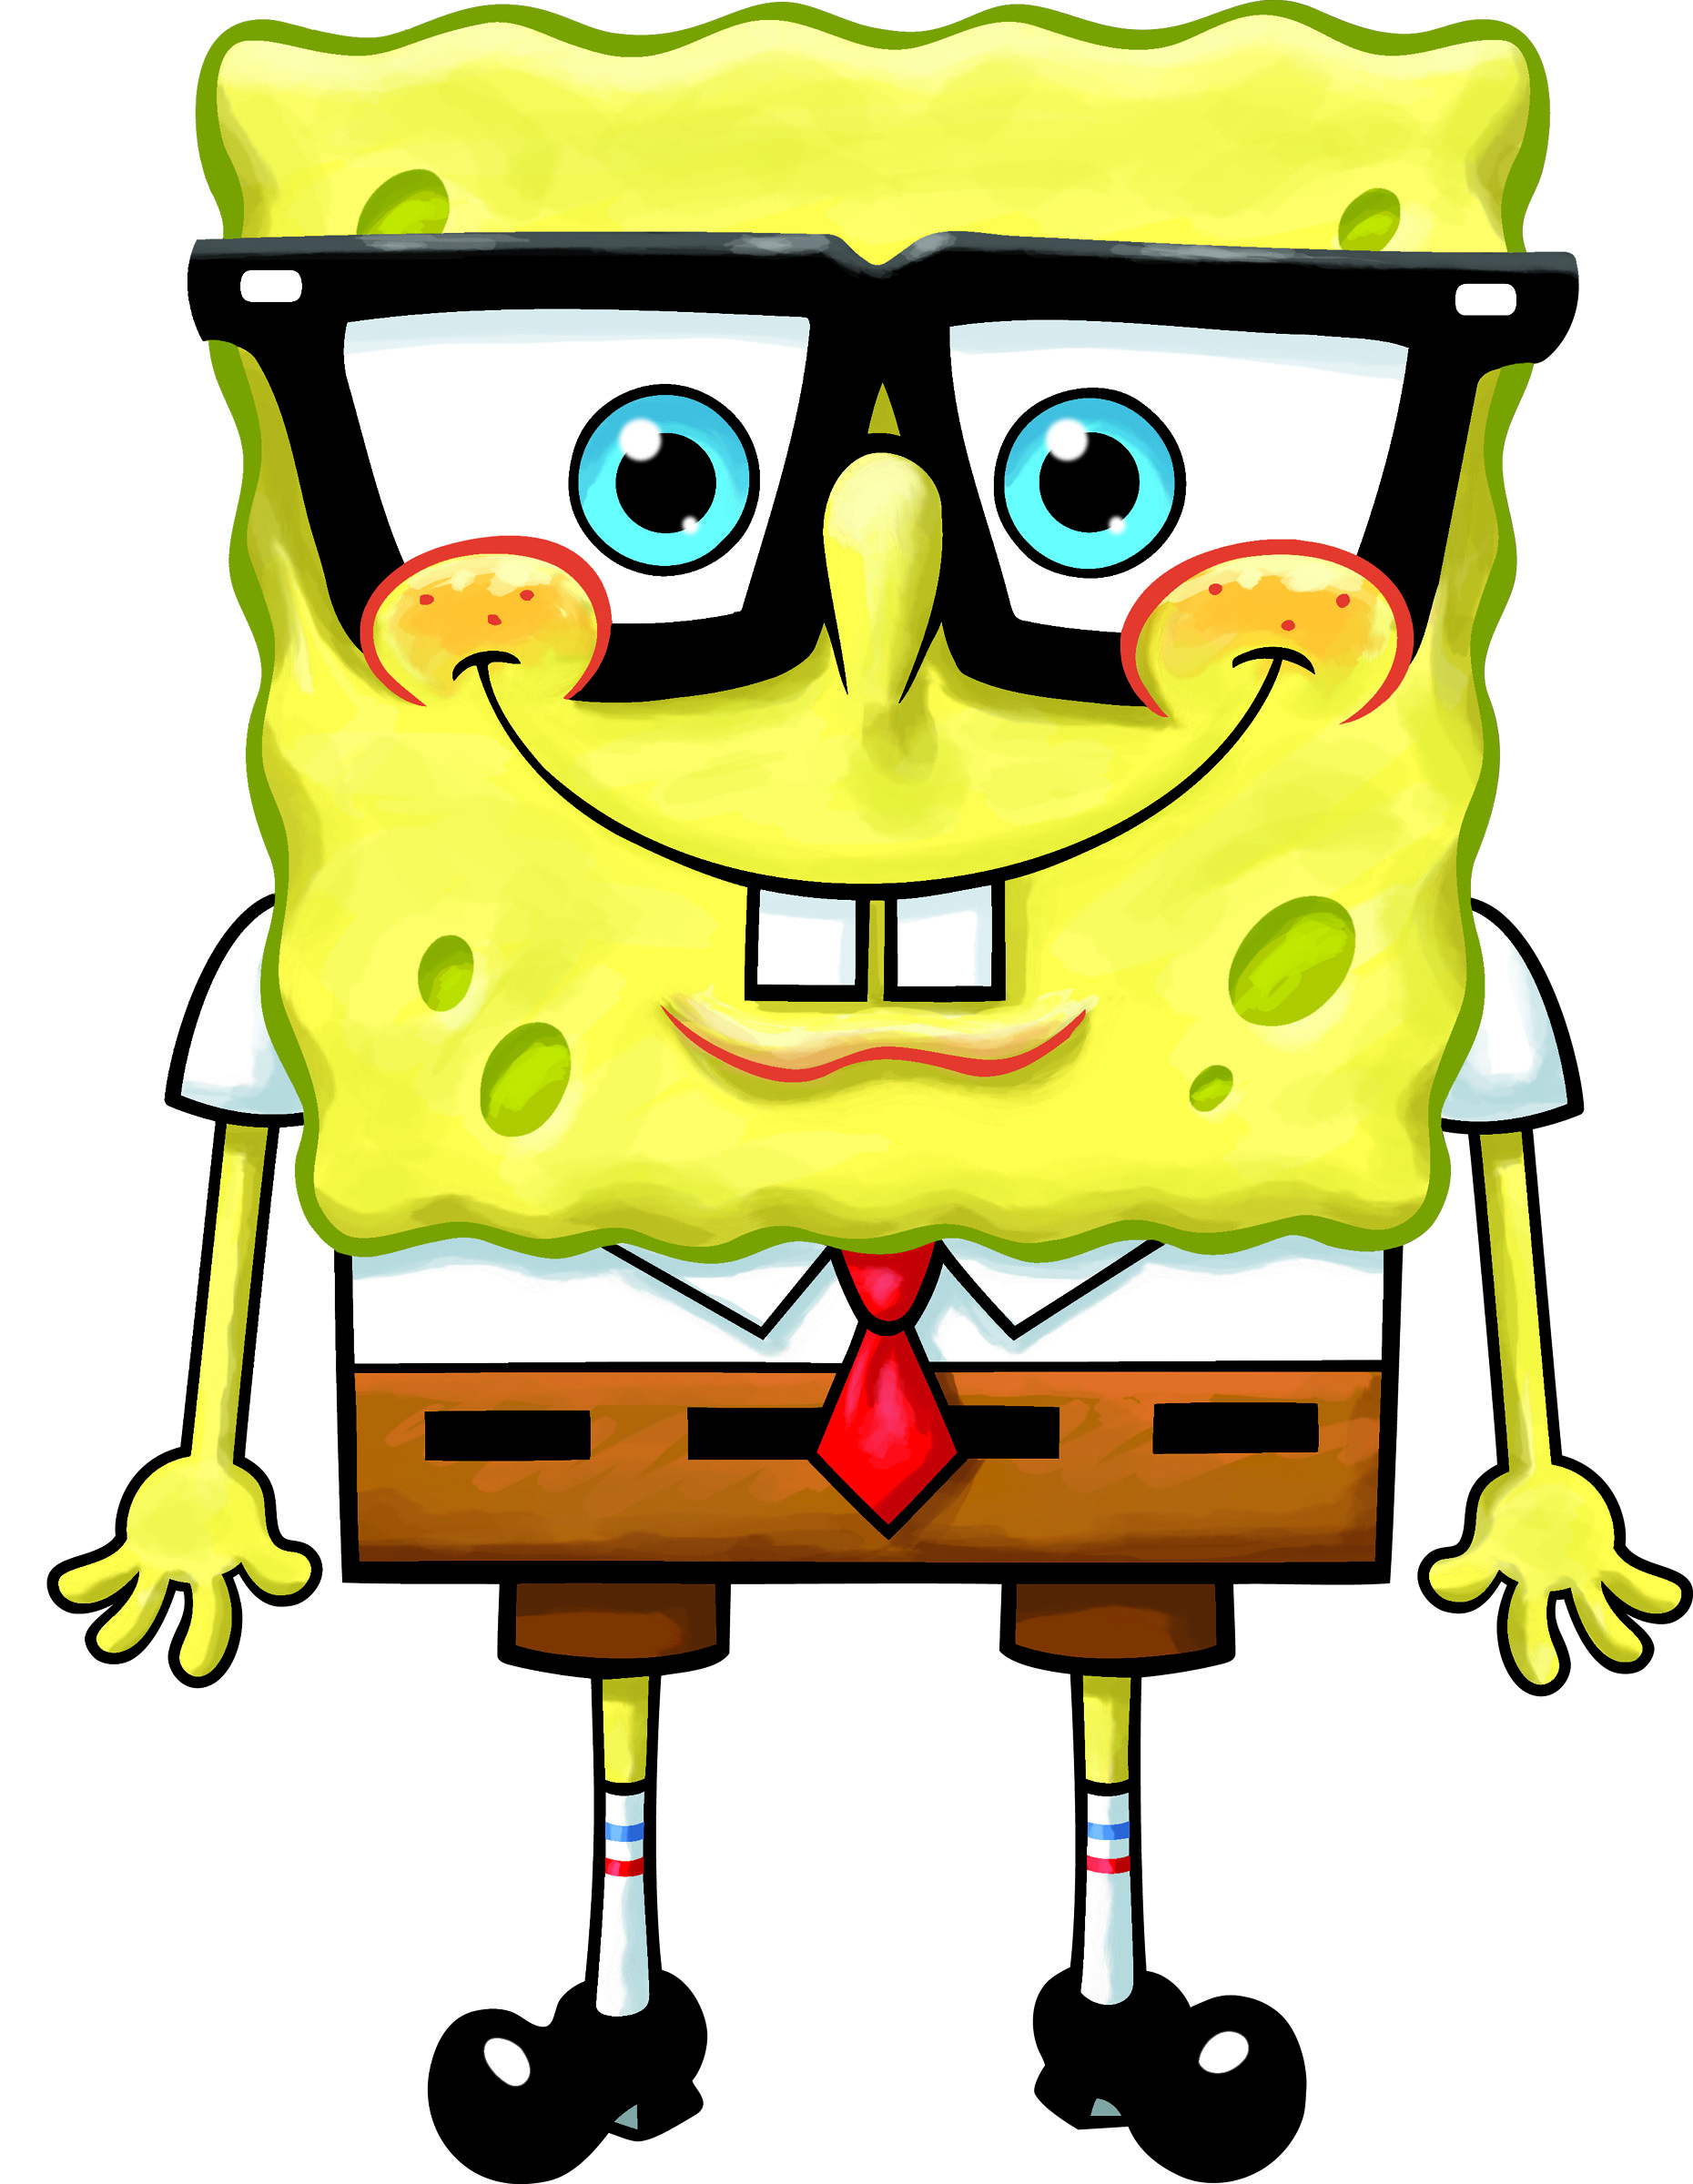 Spongebob Squarepants Characters Images & Pictures - Becuo